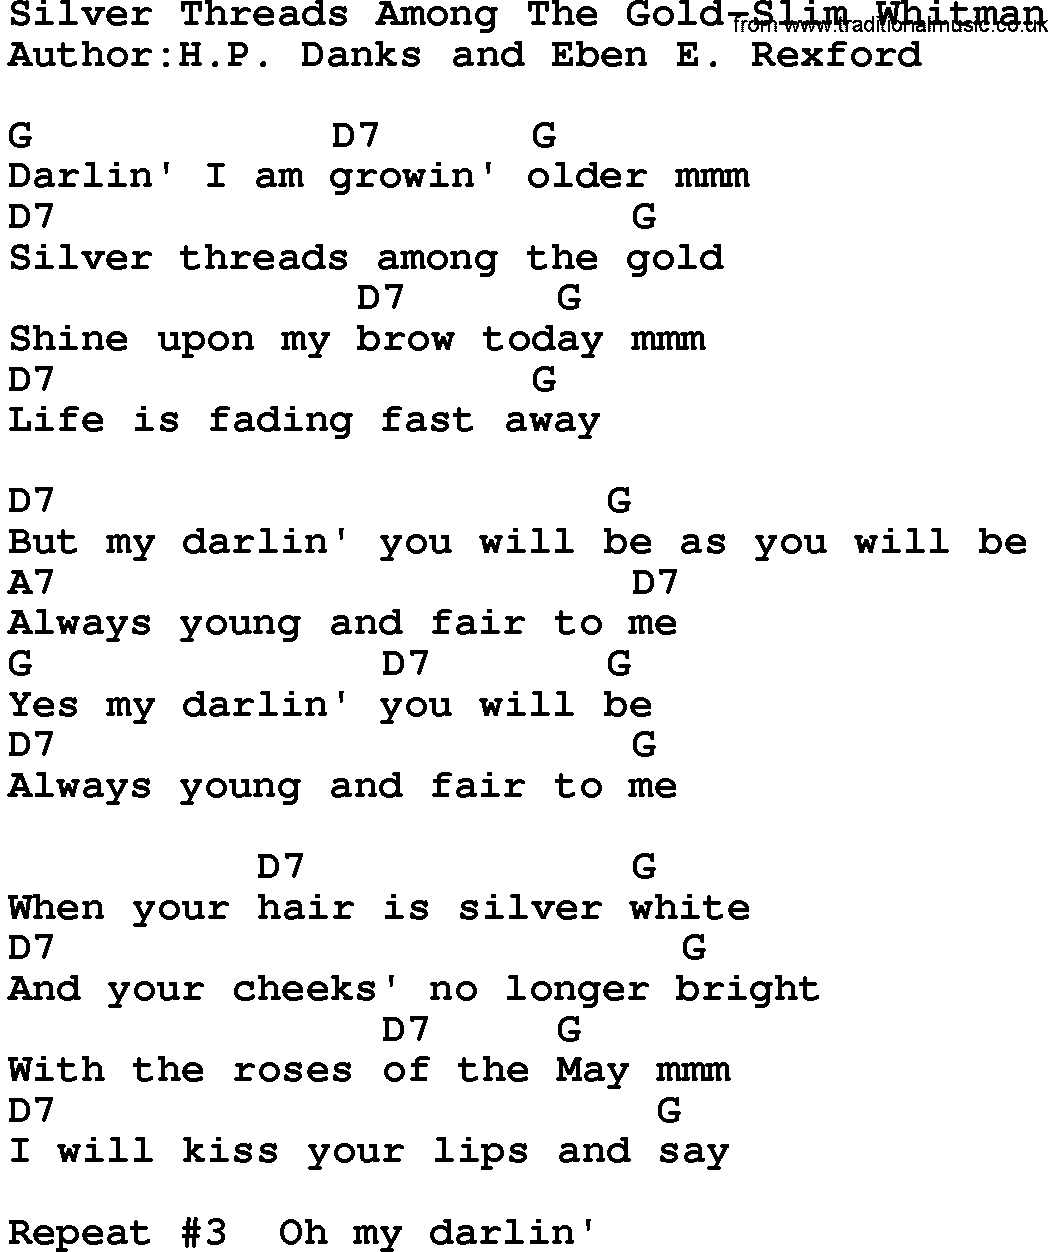 Country music song: Silver Threads Among The Gold-Slim Whitman lyrics and chords